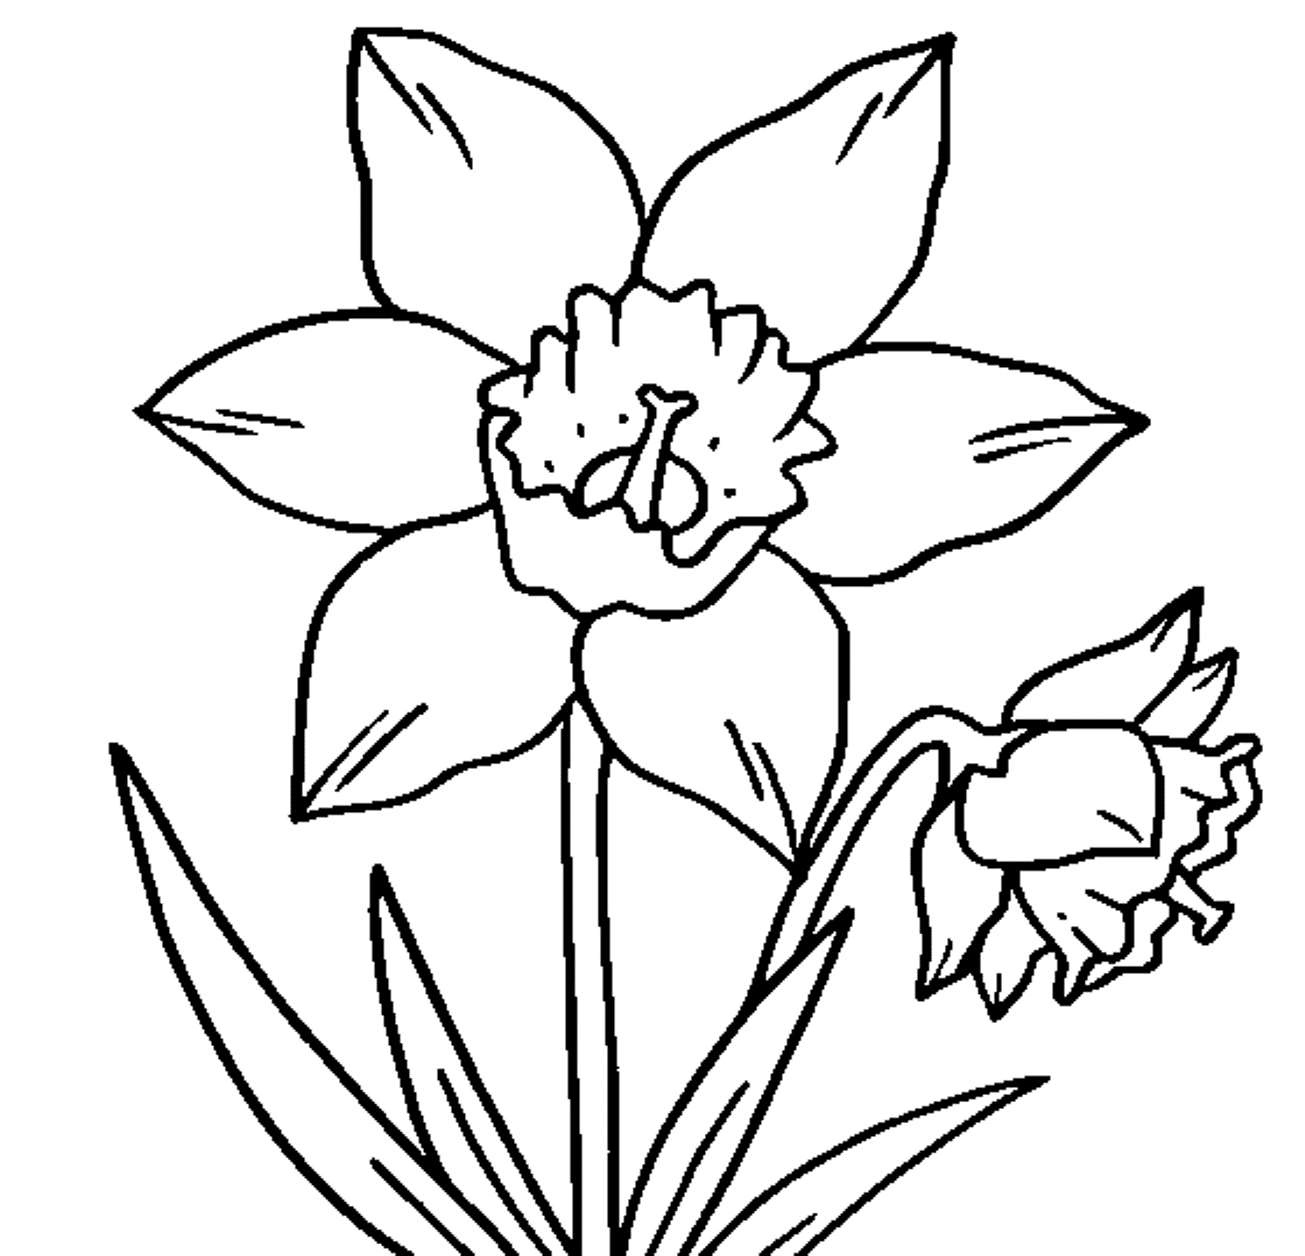 Daffodil For Colouring : Printable Daffodil Flower Coloring Page ...